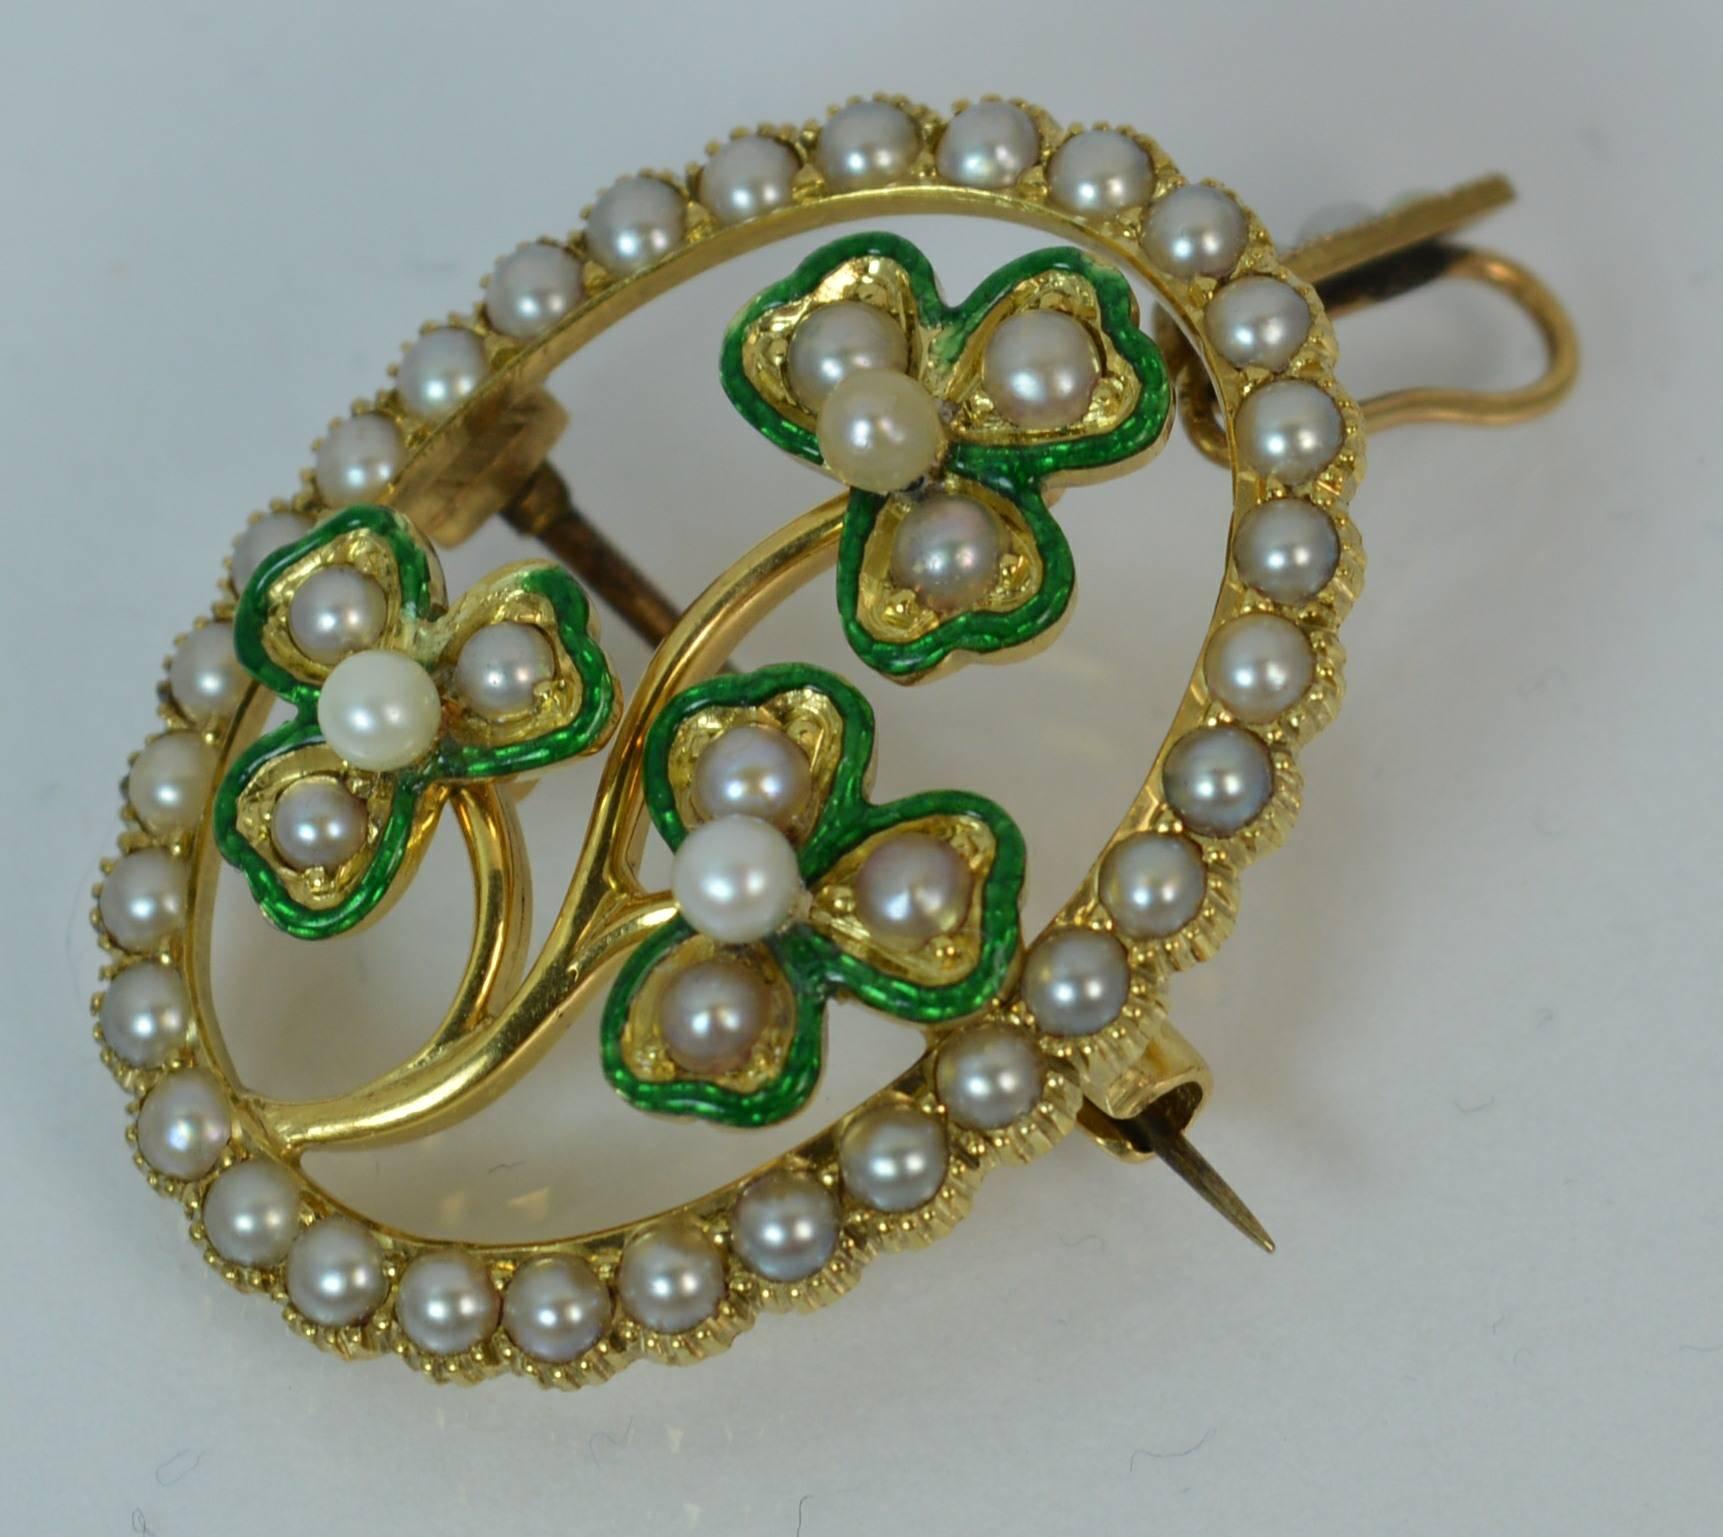 Victorian 15 Carat Gold Enamel and Pearl Three-Leaf Clover Pendant Brooch 1